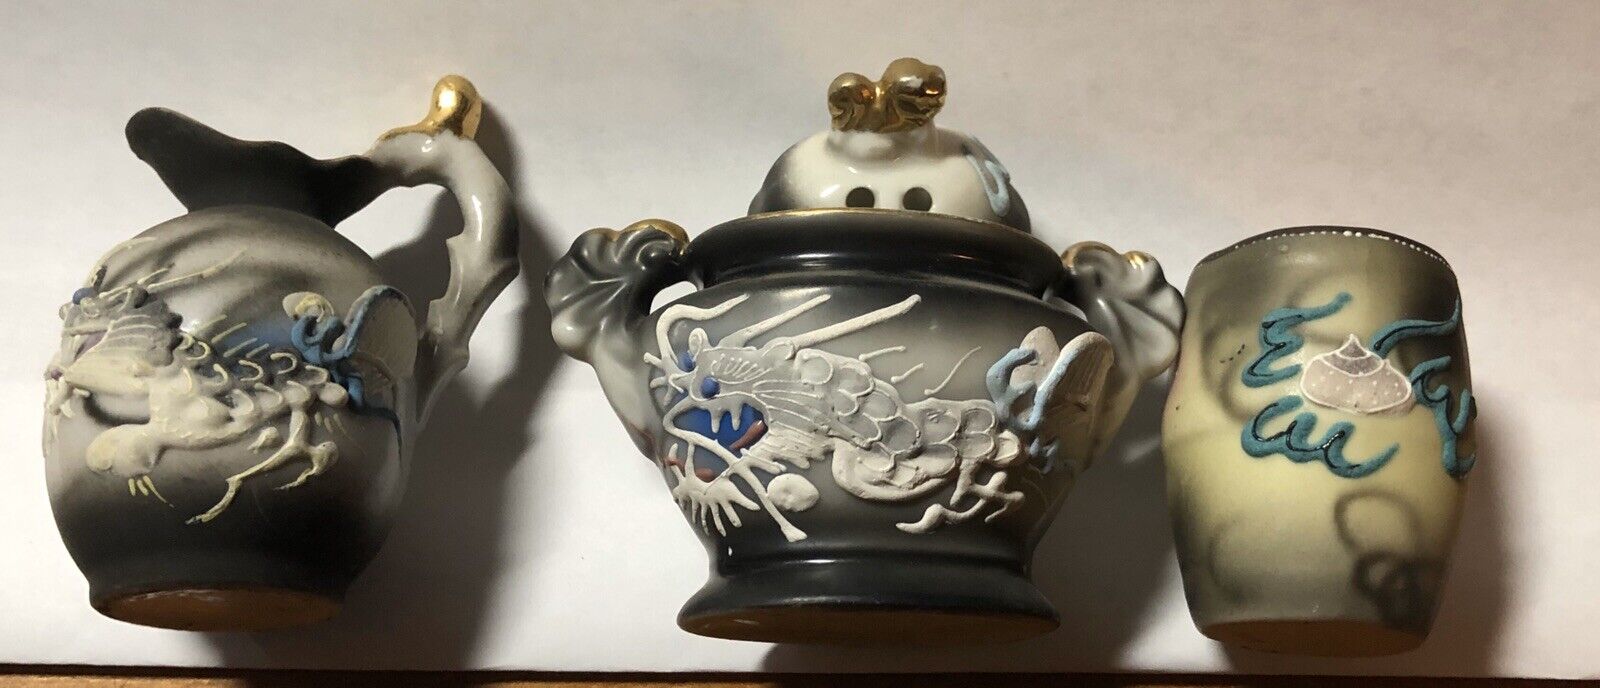 LOT OF 6 PIECES CHINESE POTTERY MINIATURE TEAPOT, TRAY, PITCHER